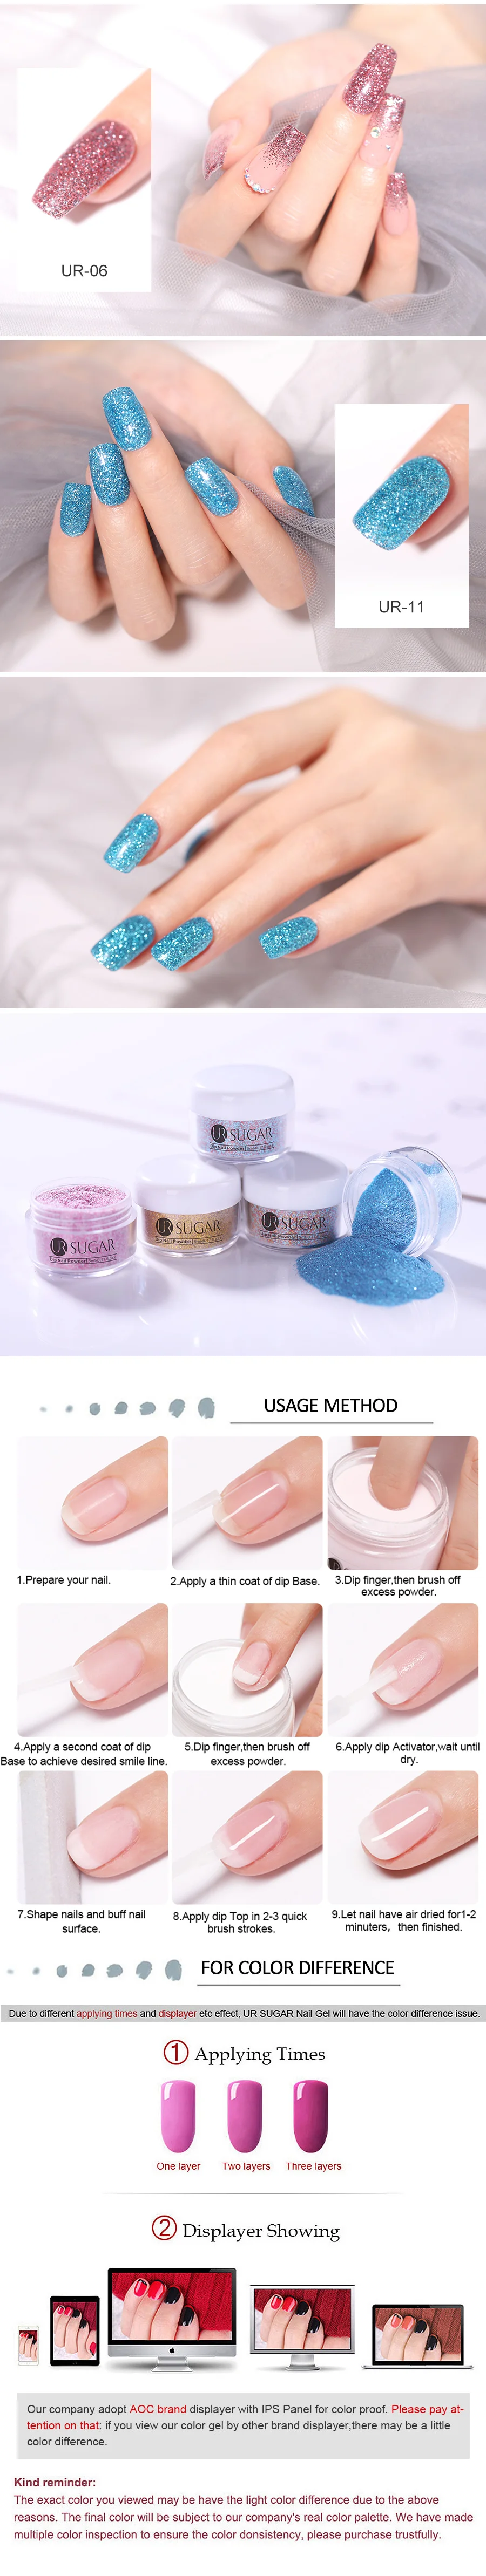 UR SUGAR 5pcs Dipping Nail Glitter Powder Kits Without Lamp Cure Dip System French Manicure with Base Activator Liquid Gel Set